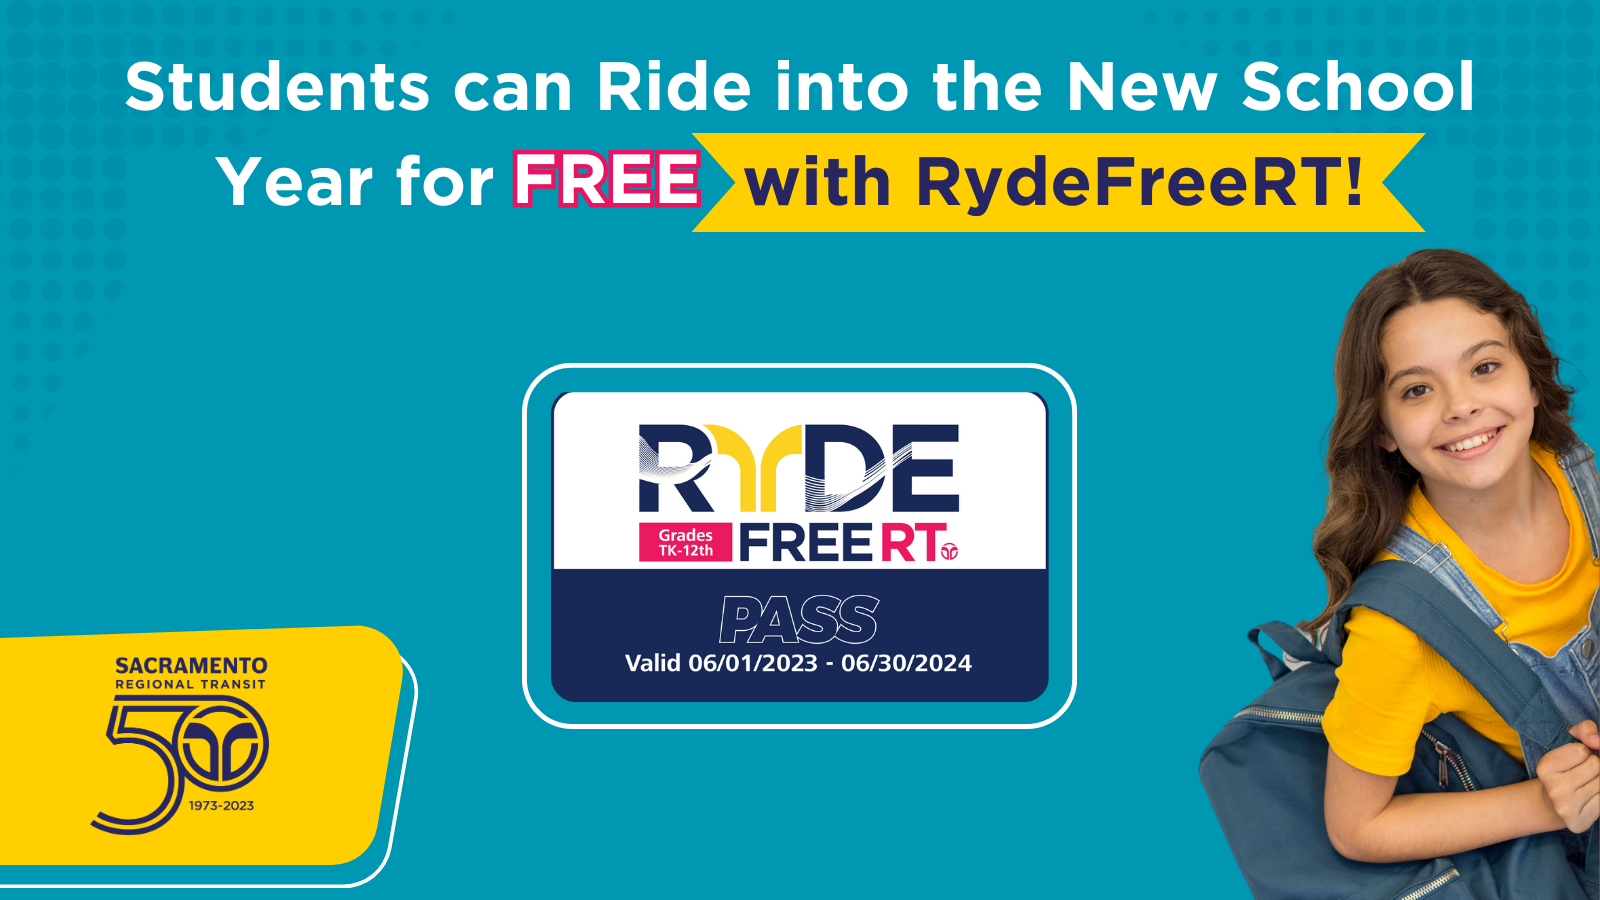 Students can ride into the new school year for FREE with RydeFreeRT. Photo of a student with backpack and image of rydefreert card.